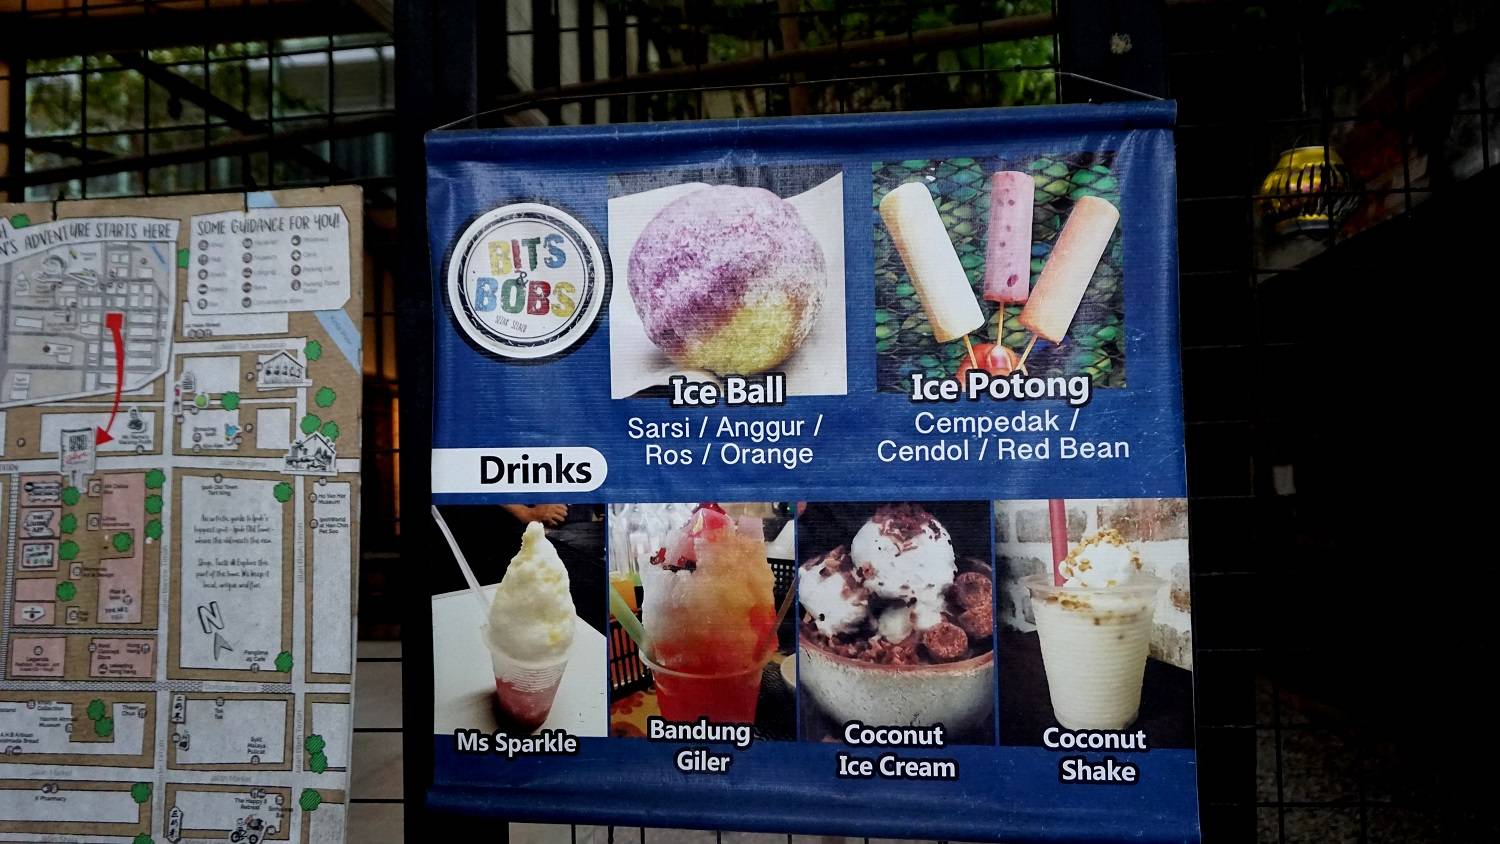 Bits and Bobs is a little shop with a counter you order from and it faces a small pebbled courtyard with some wooden benches you can sit and enjoy your treats! They insist/recommend you have your ice ball with 3-4 flavours - sarsi = sarsaparilla, anggur = grape, ros = rose and orange 